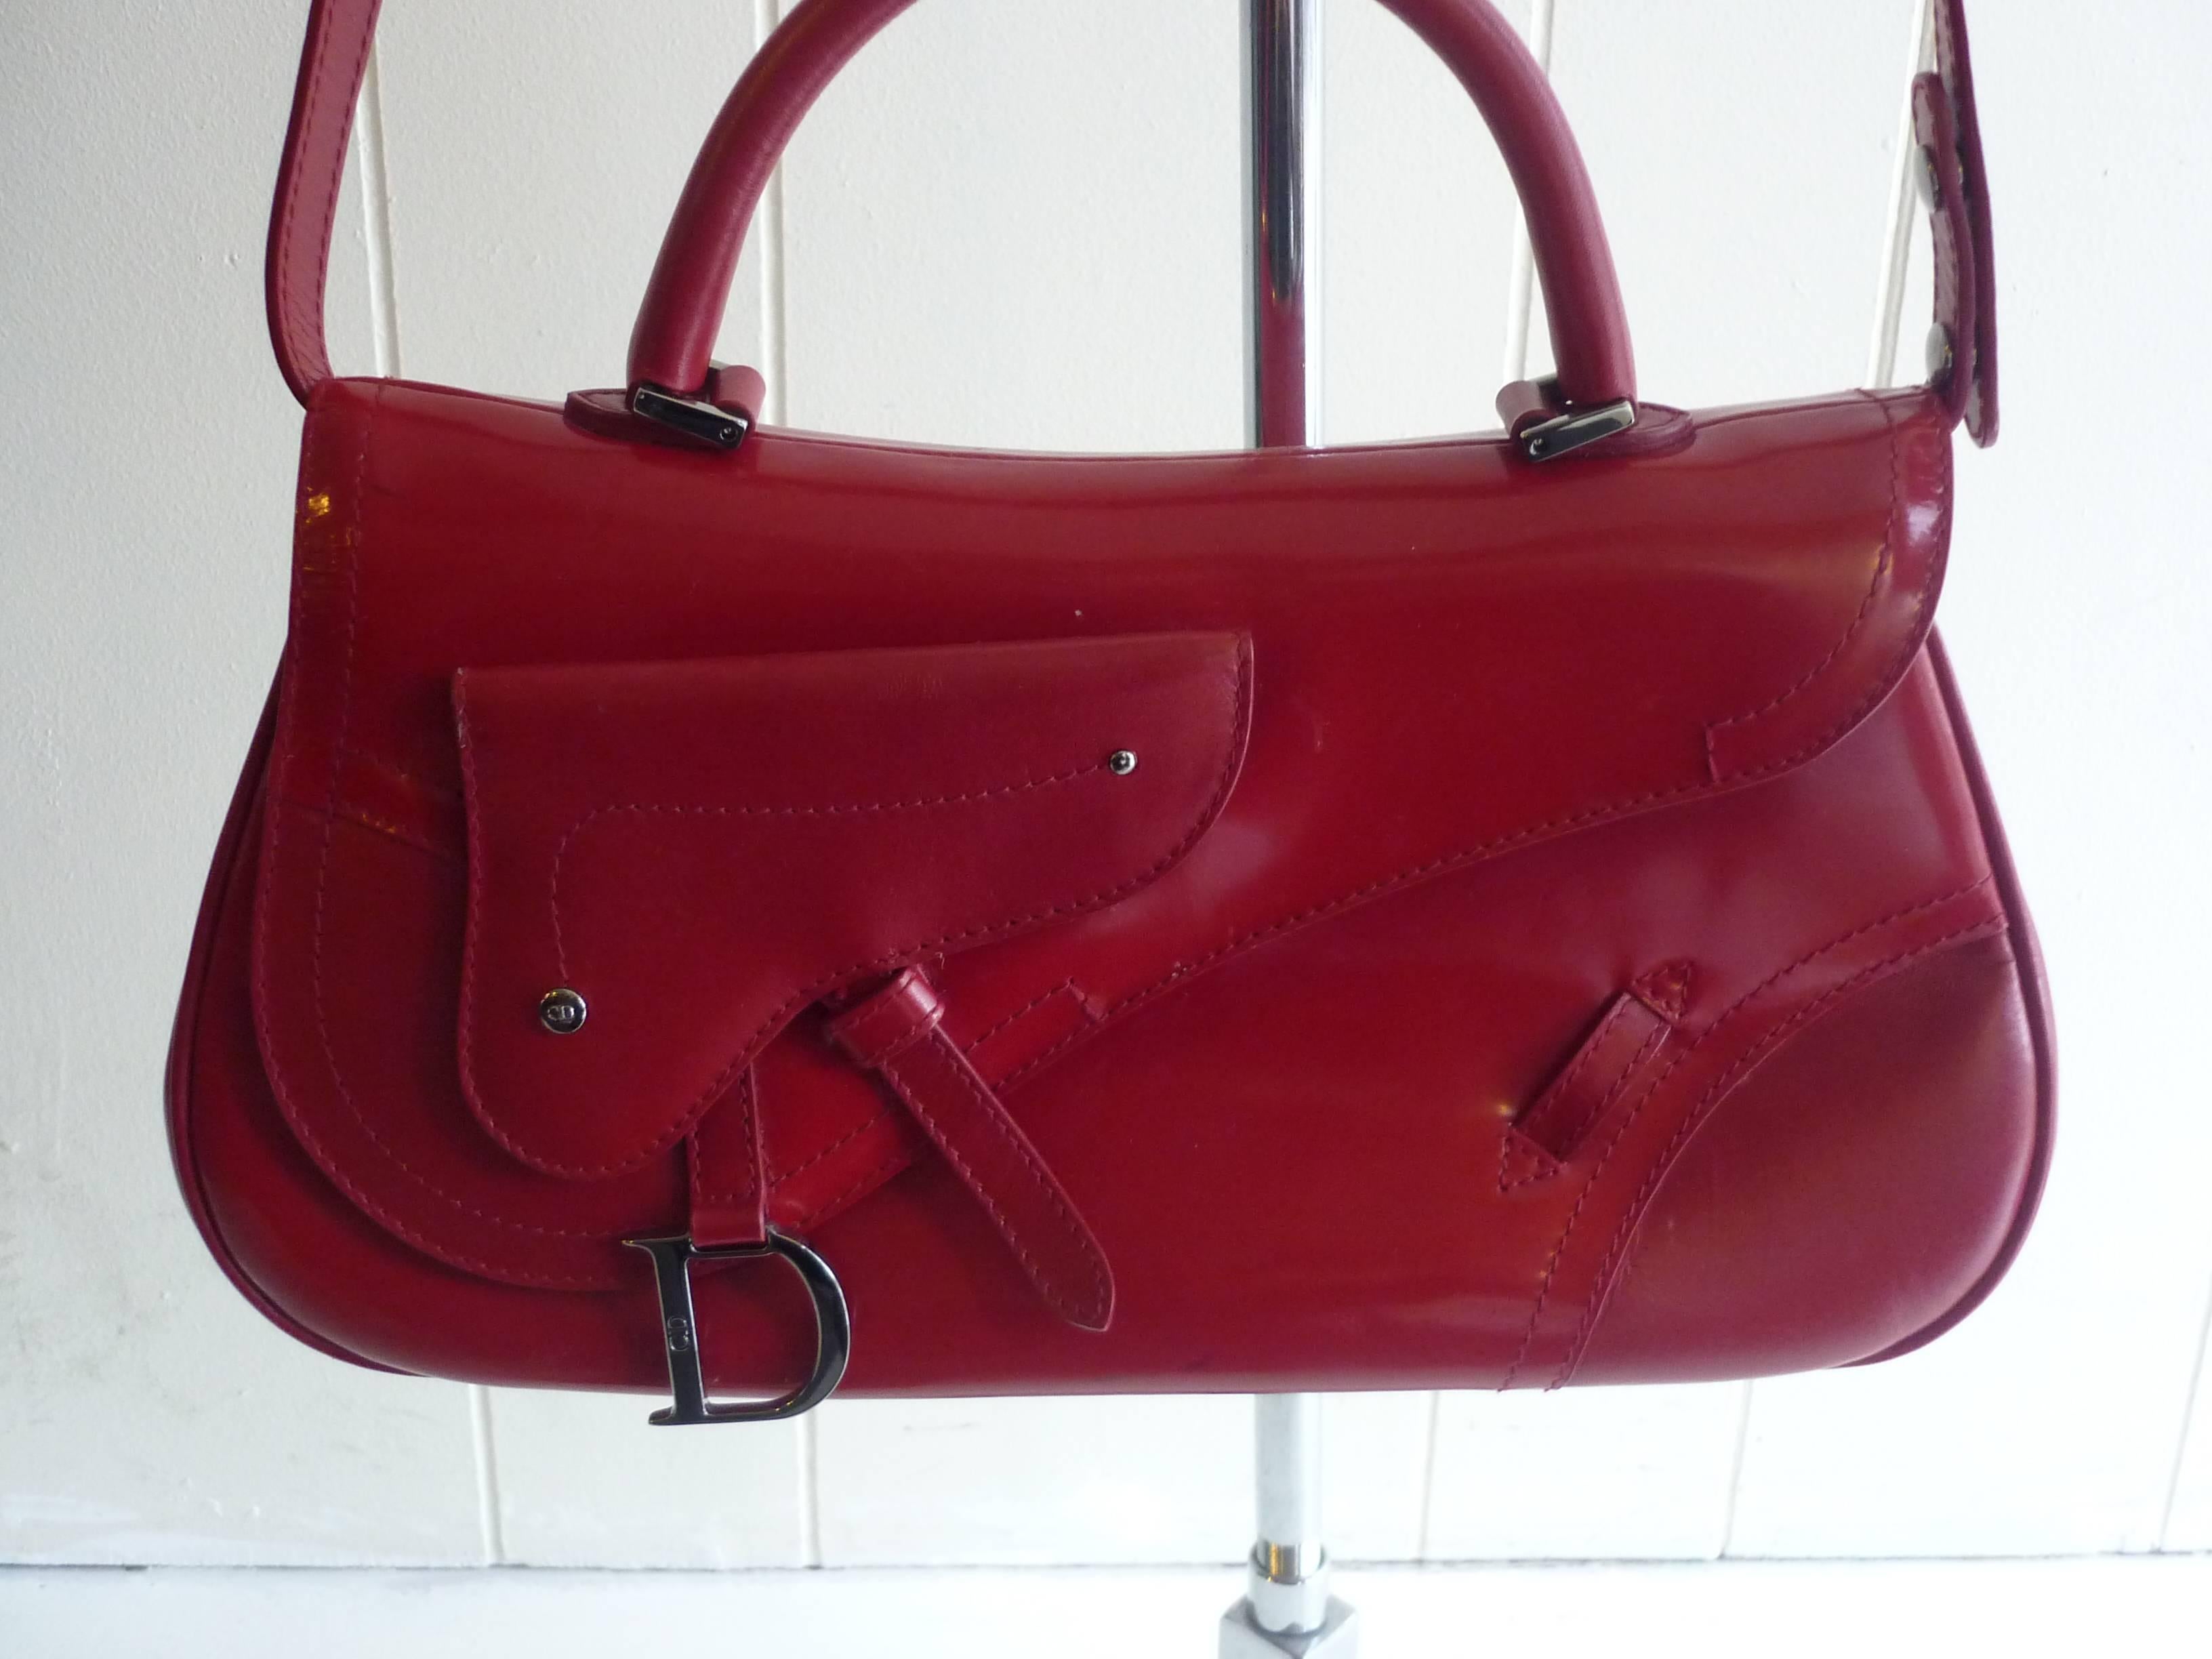 Women's Christian Dior Smooth Red Leather Saddle Bag